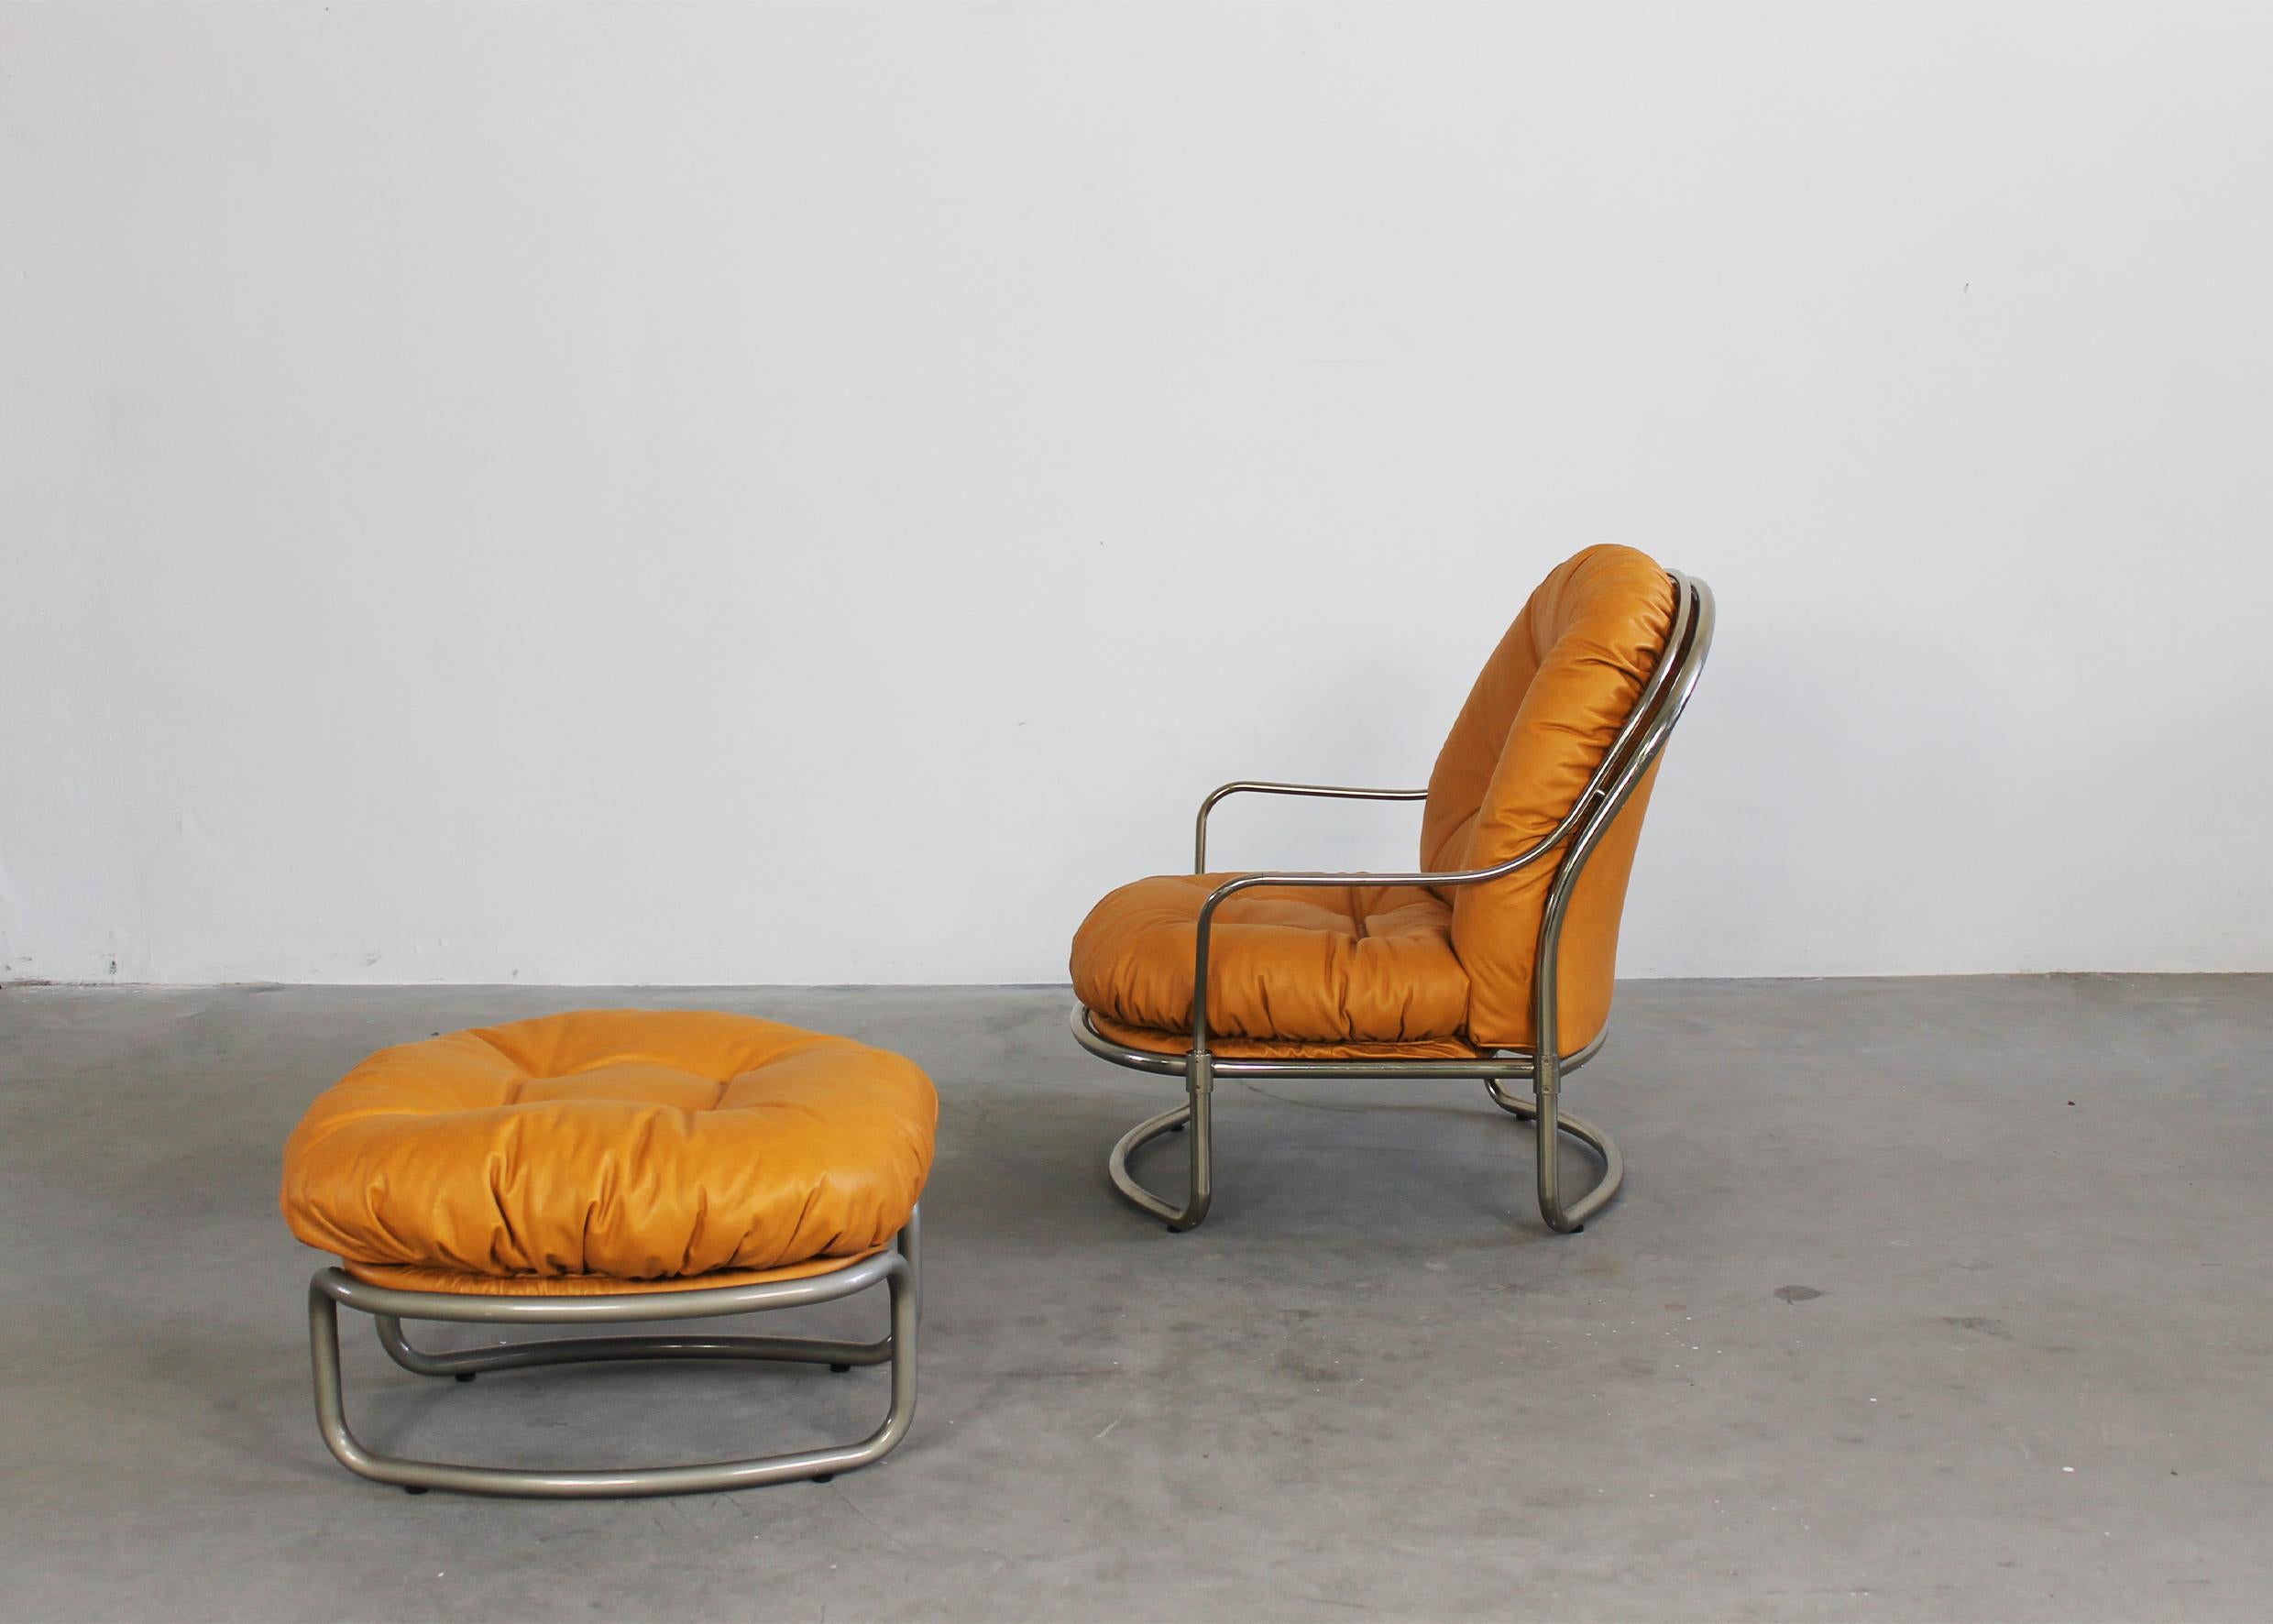 Carlo de Carli 915 Armchair with Footrest in Metal and Leather by Cinova 1970s In Good Condition For Sale In Montecatini Terme, IT